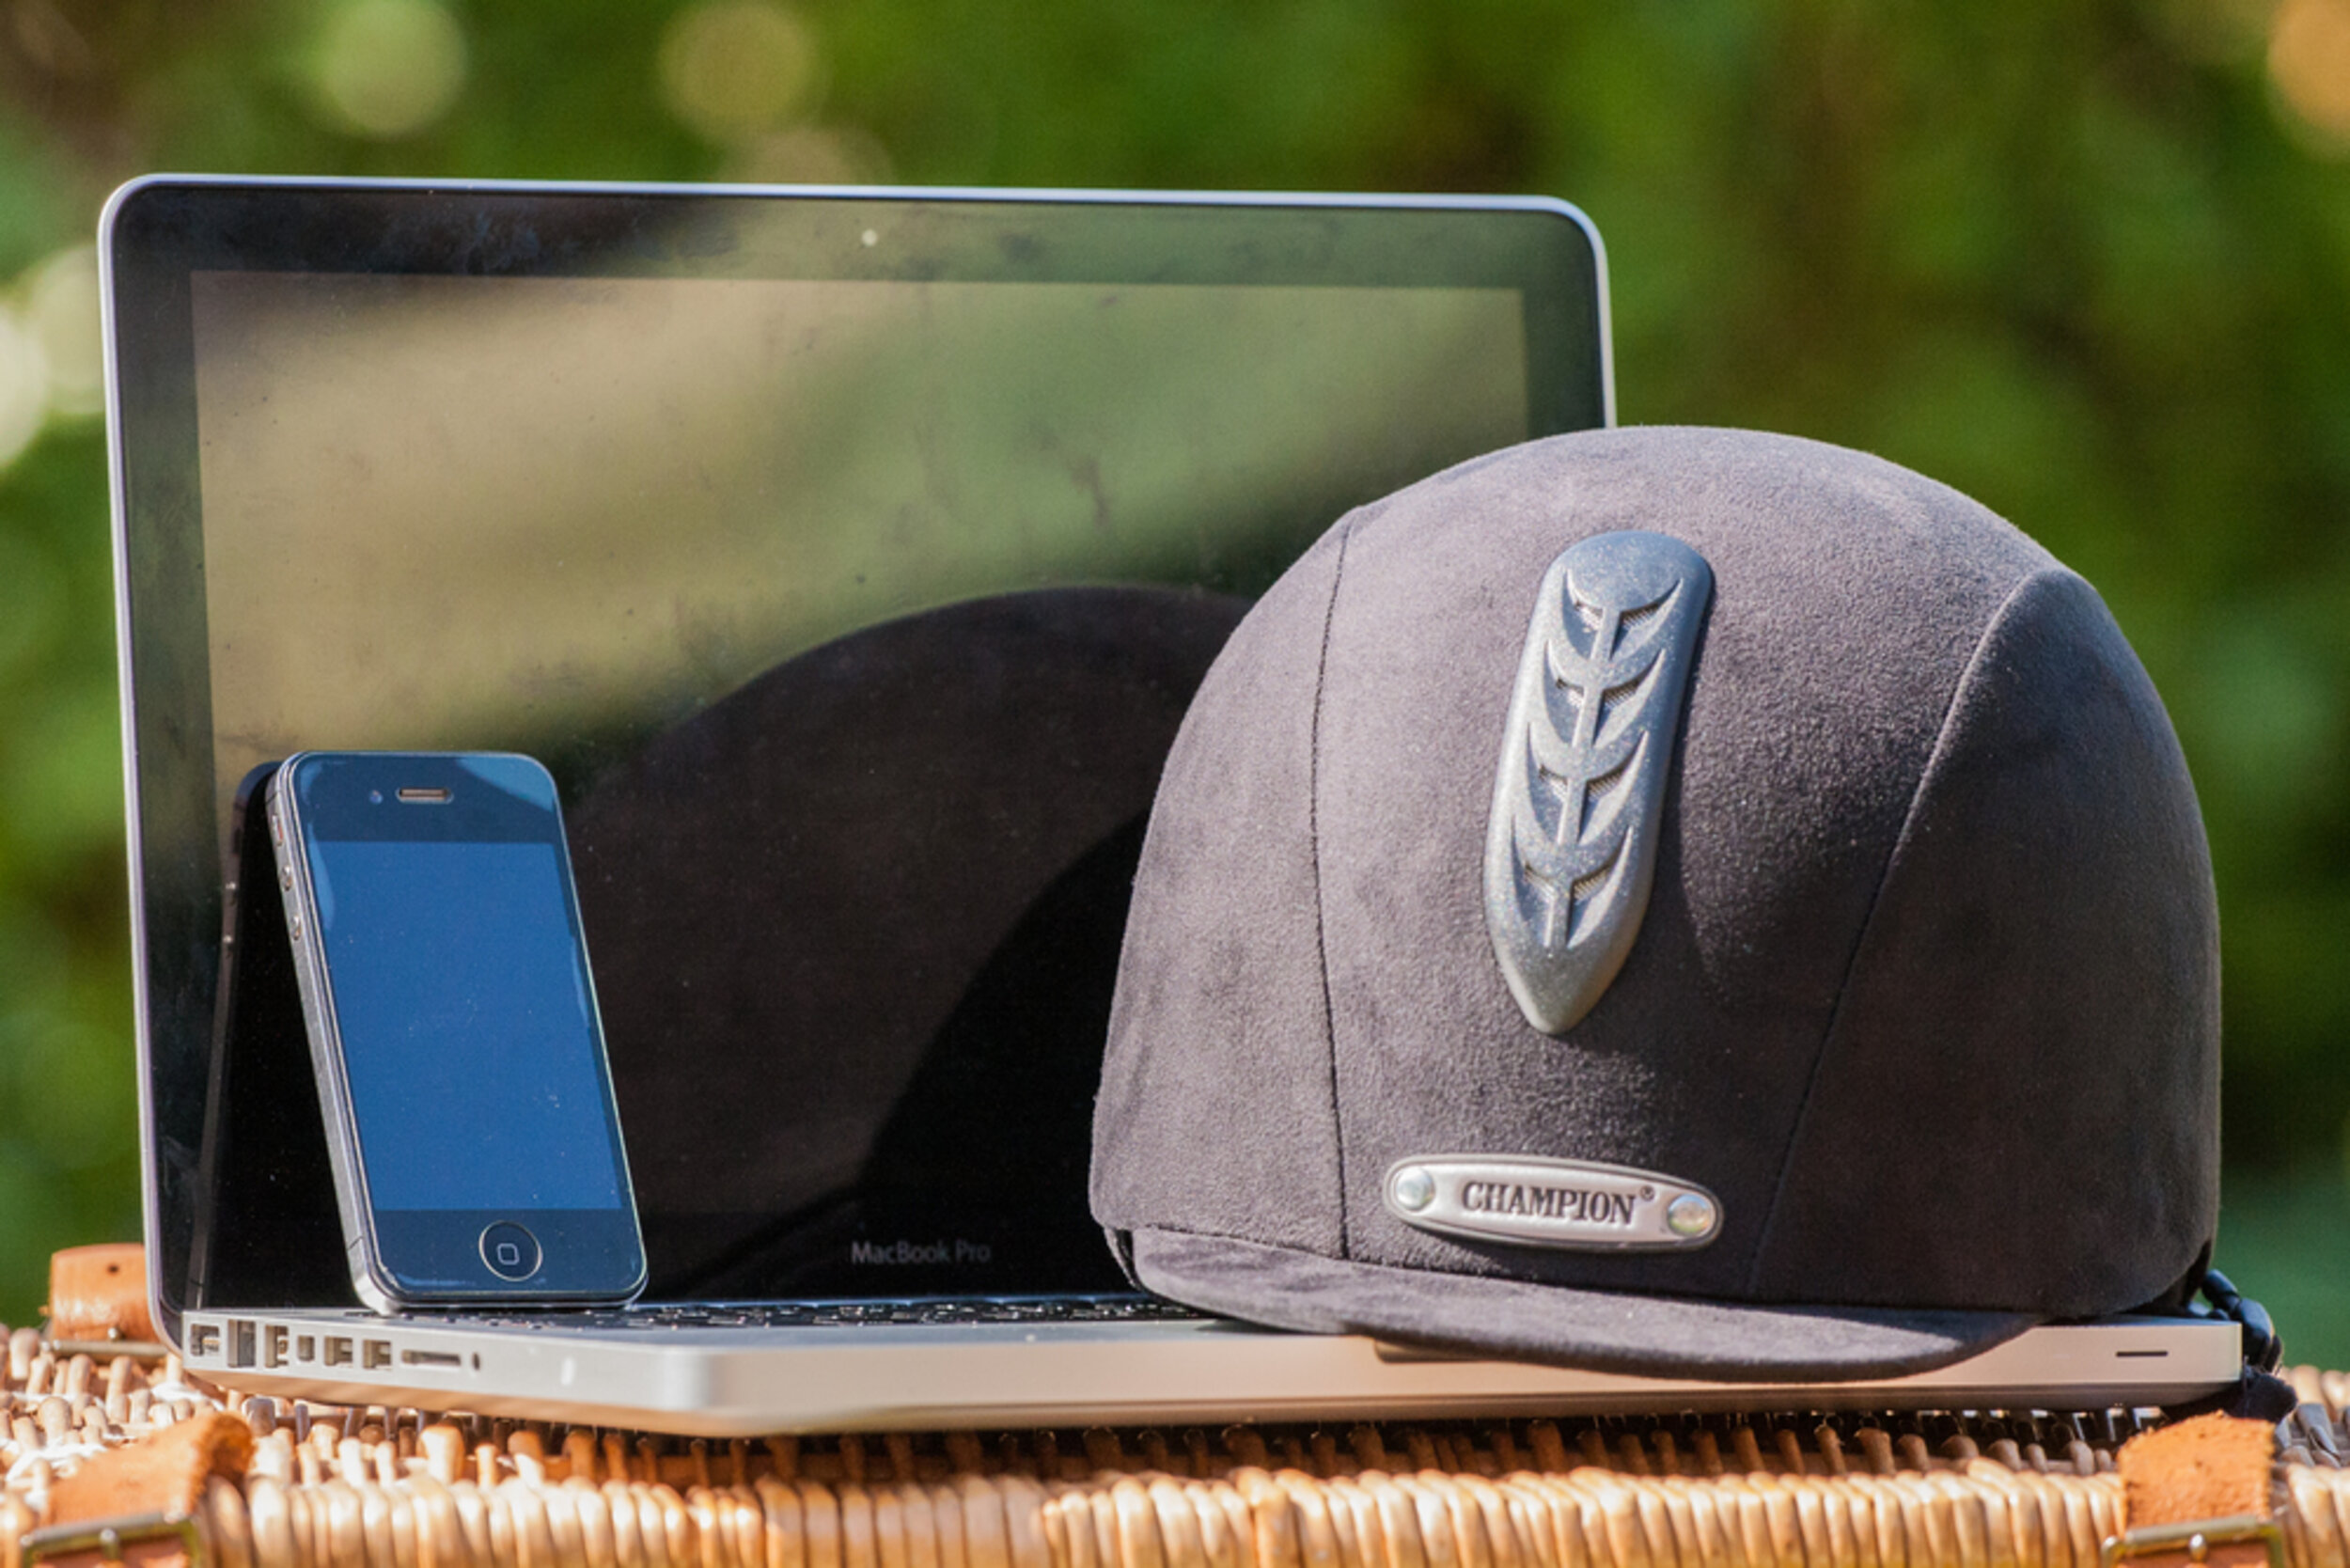 A laptop, a phone and a riding hat